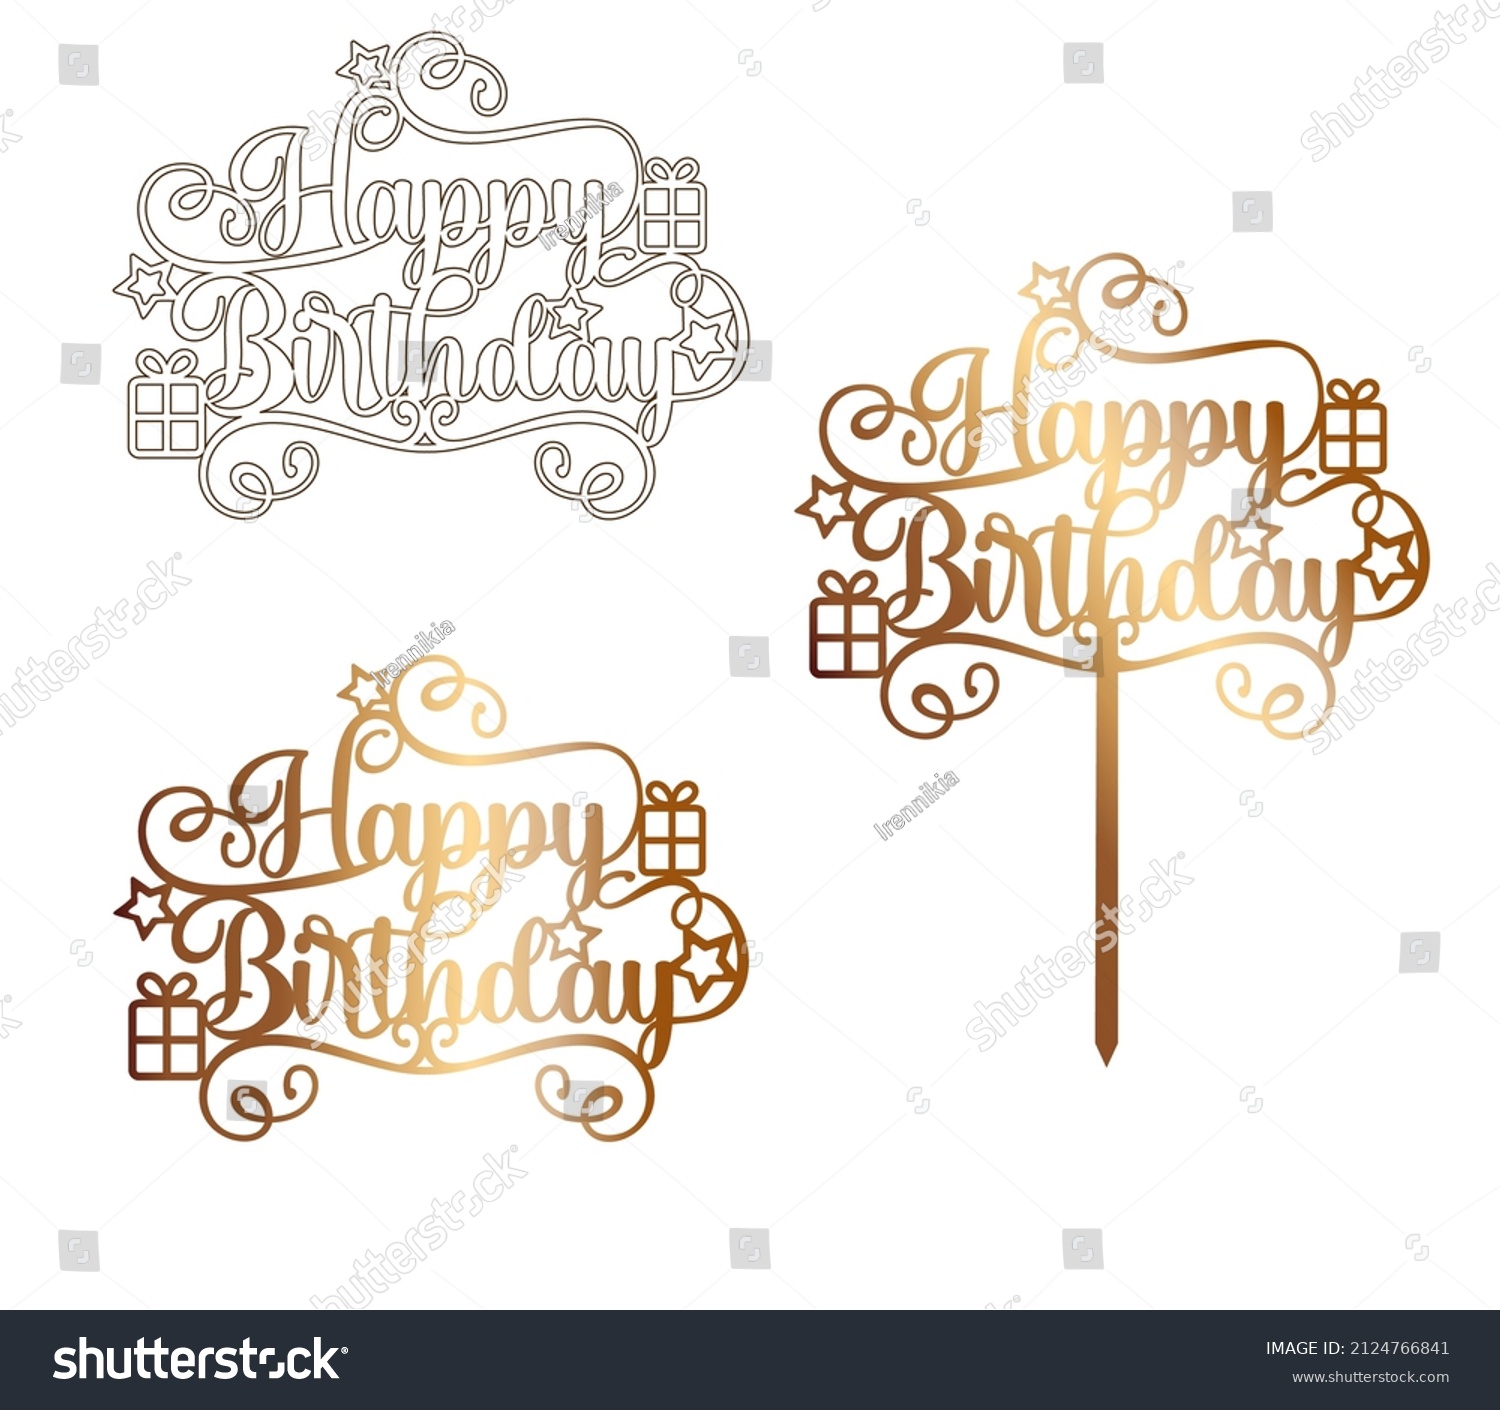 SVG of Happy birthday cake topper with stars ang gifts. Sign for laser cutting svg